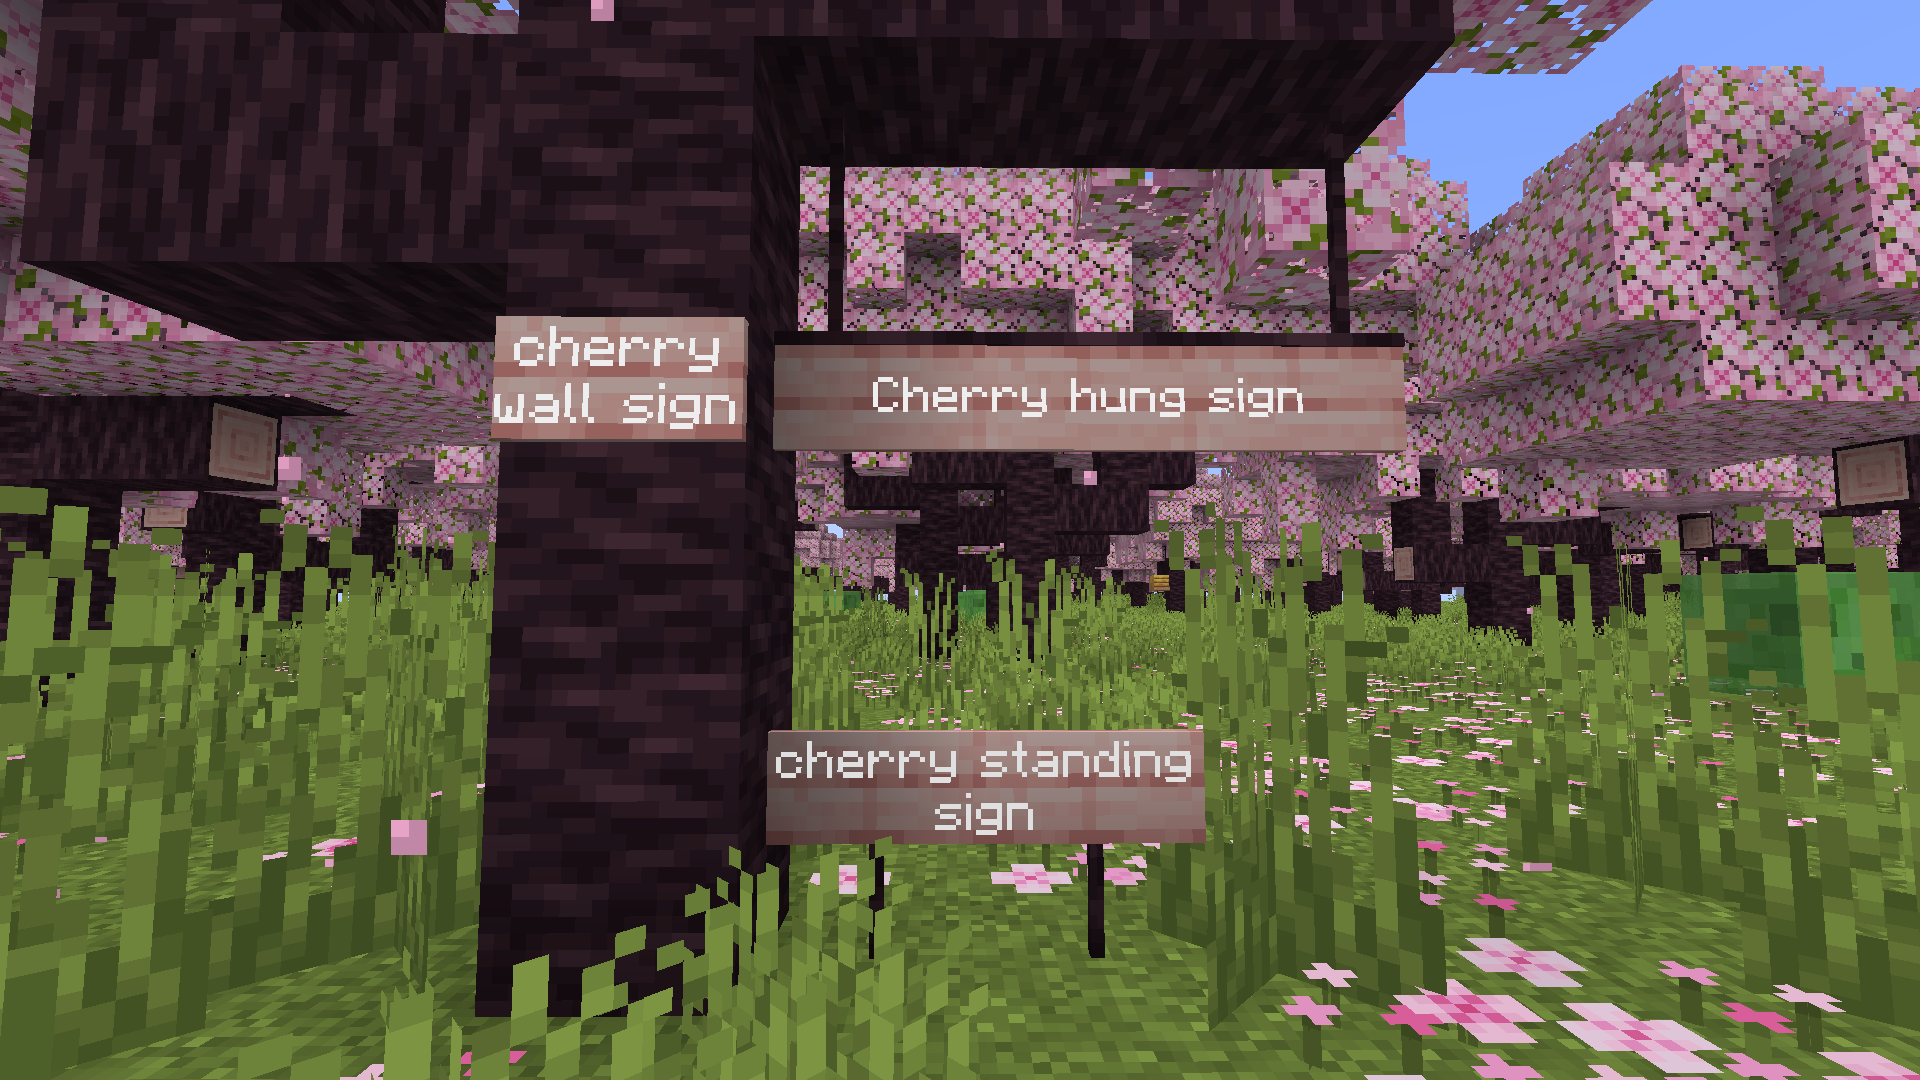 The cherry signs